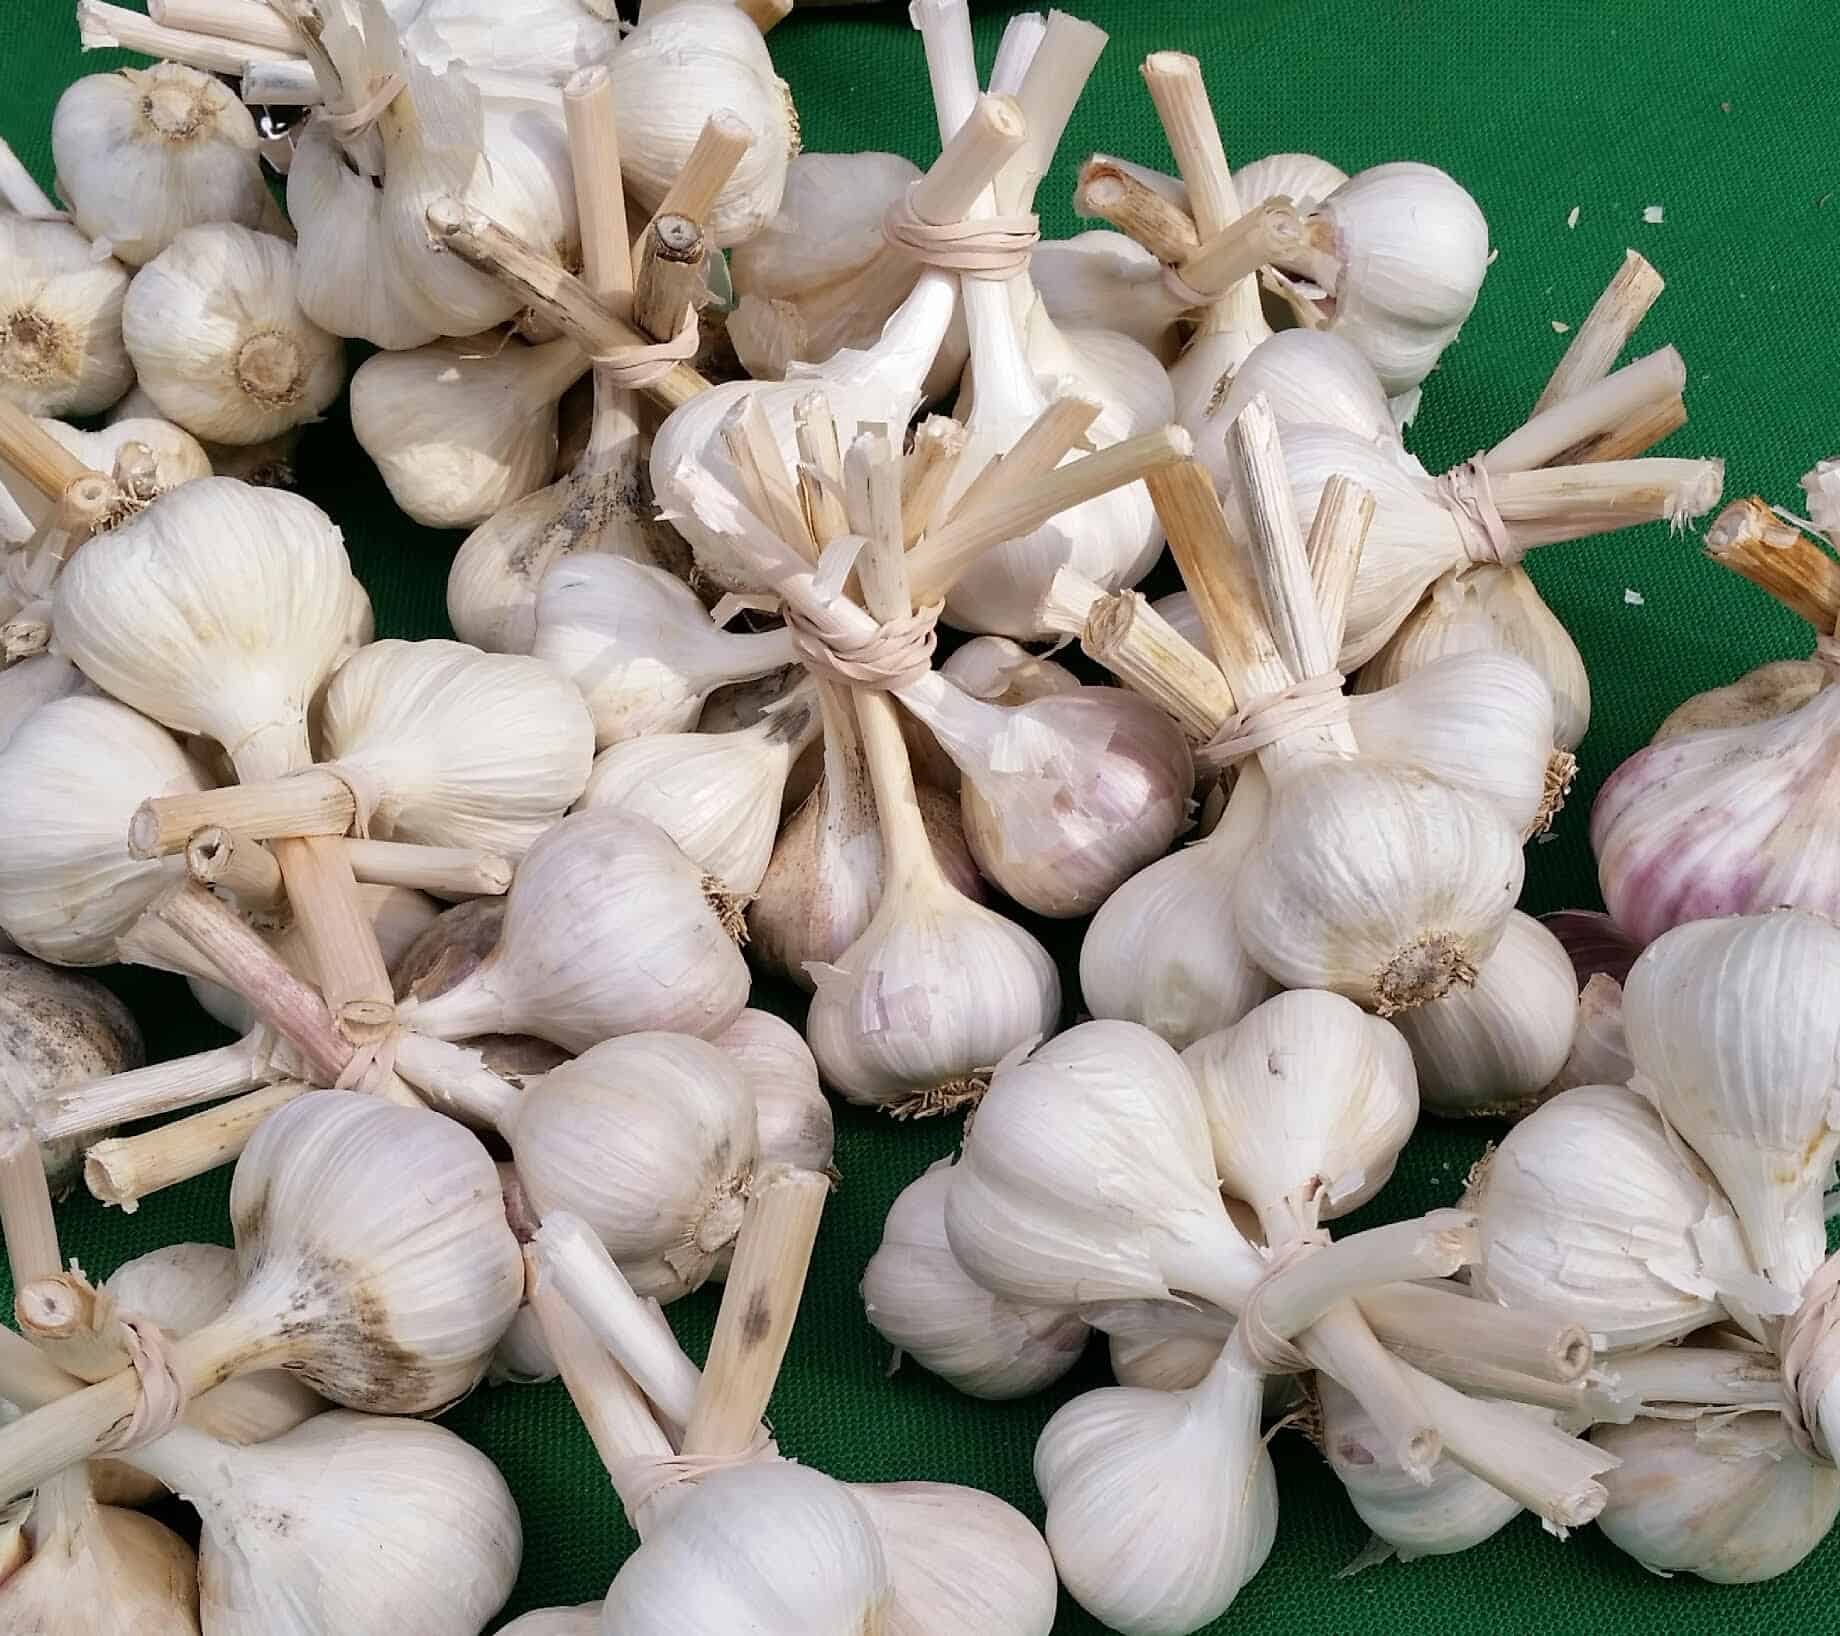 Several wrapped together bulbs of garlic